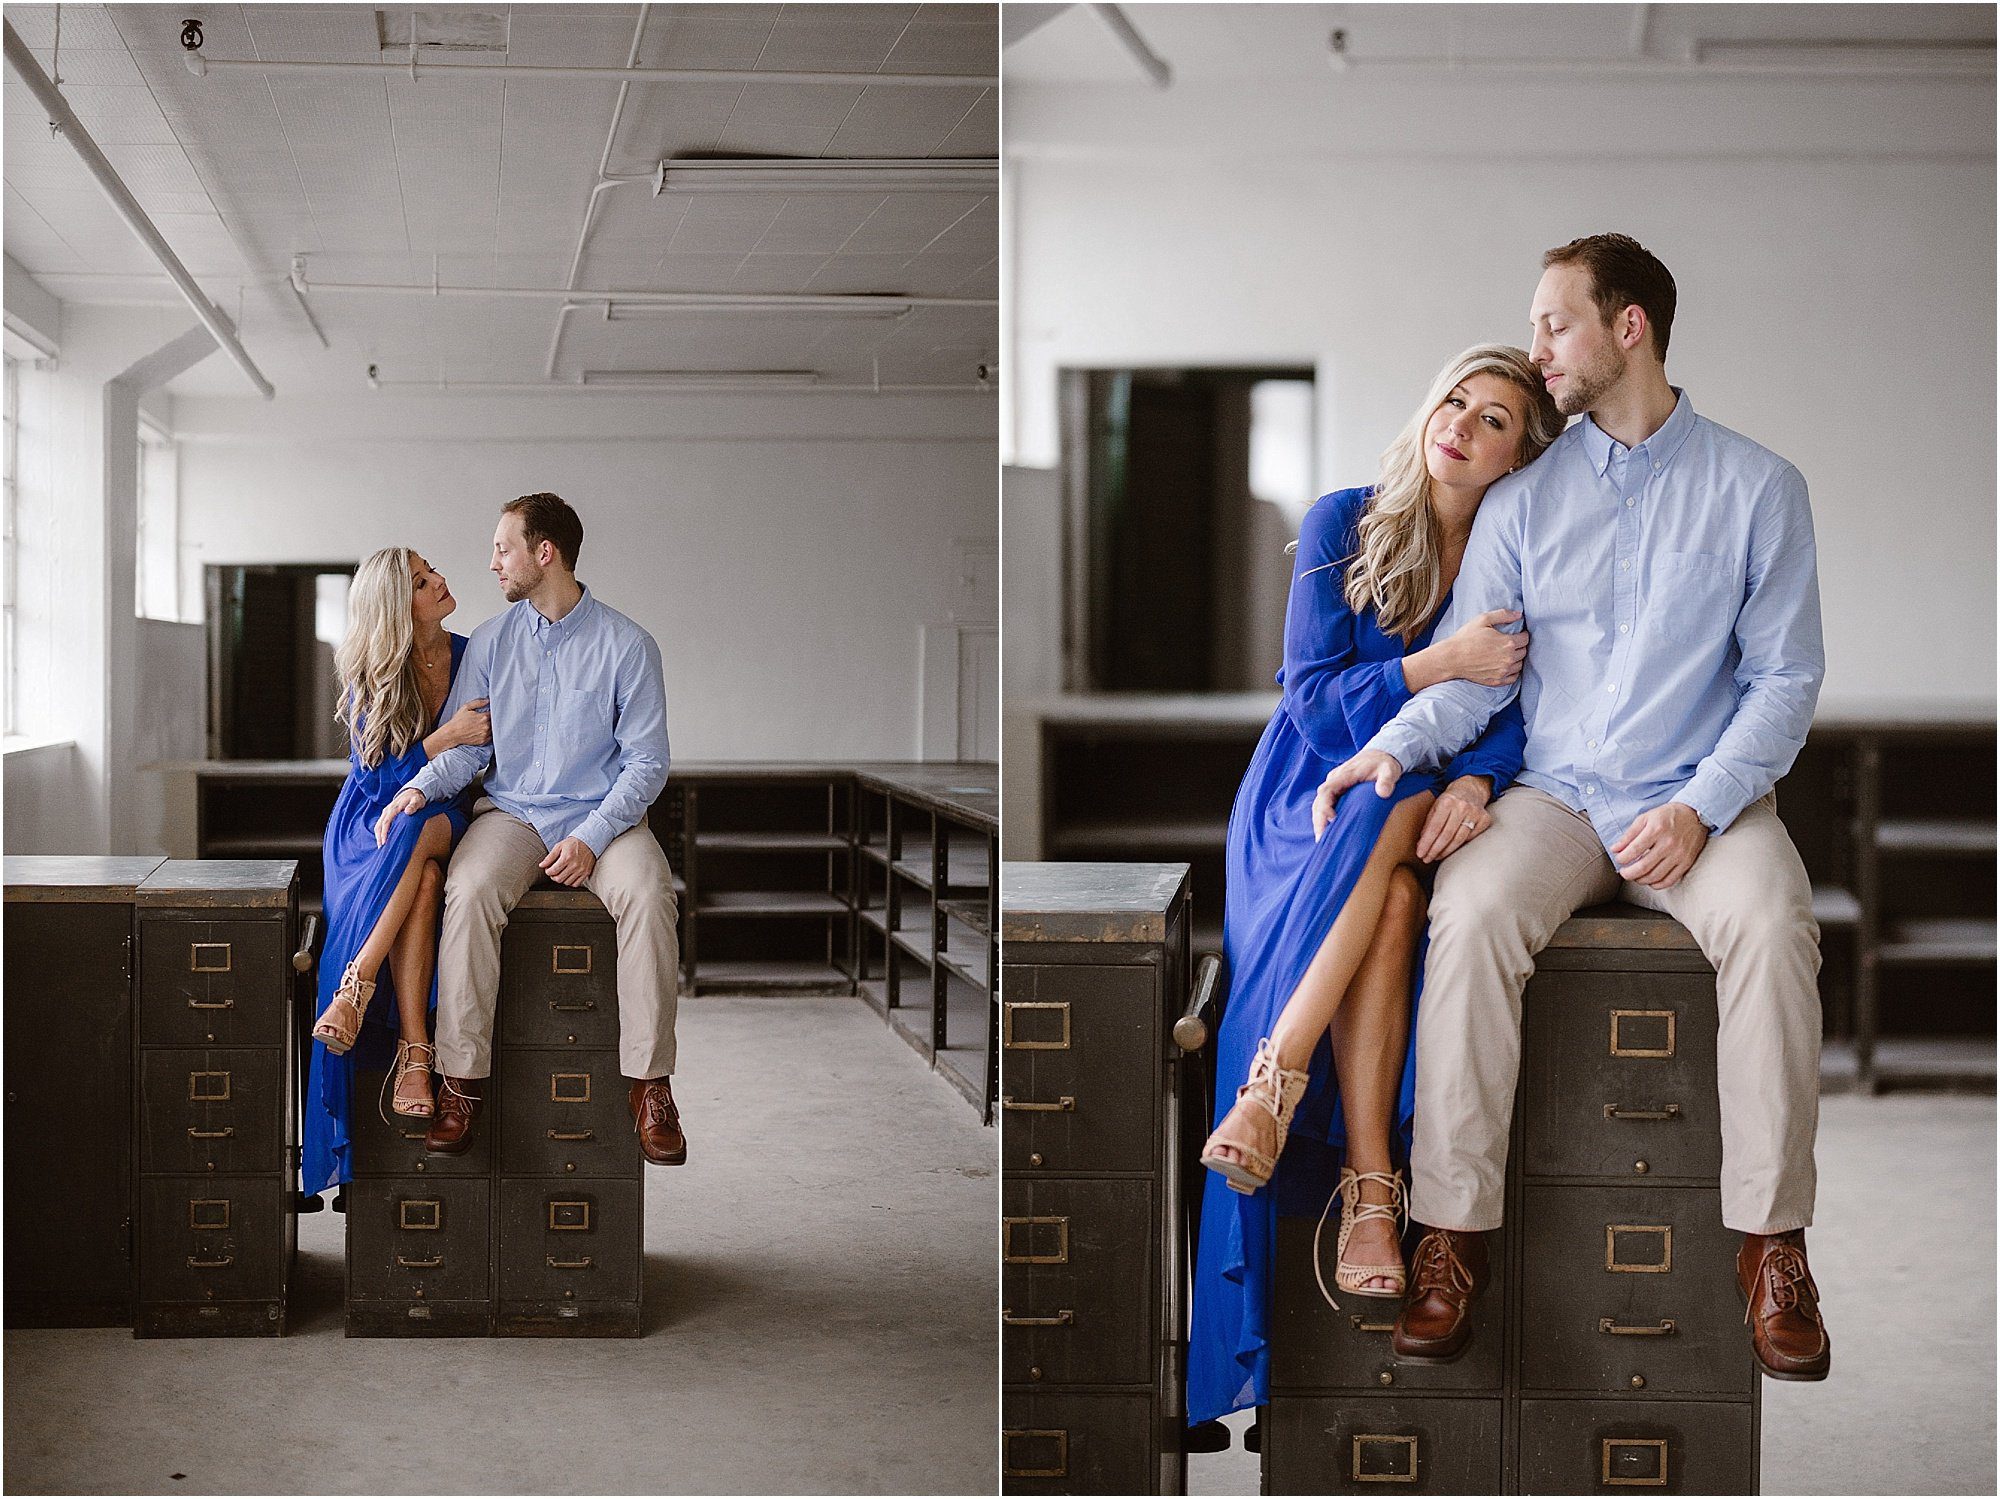 Industrial Engagement Photos in Knoxville | Photographed by Erin Morrison Photography | https://erinmorrisonphotography.com/rainy-day-industrial-engagement-photos-knoxville/